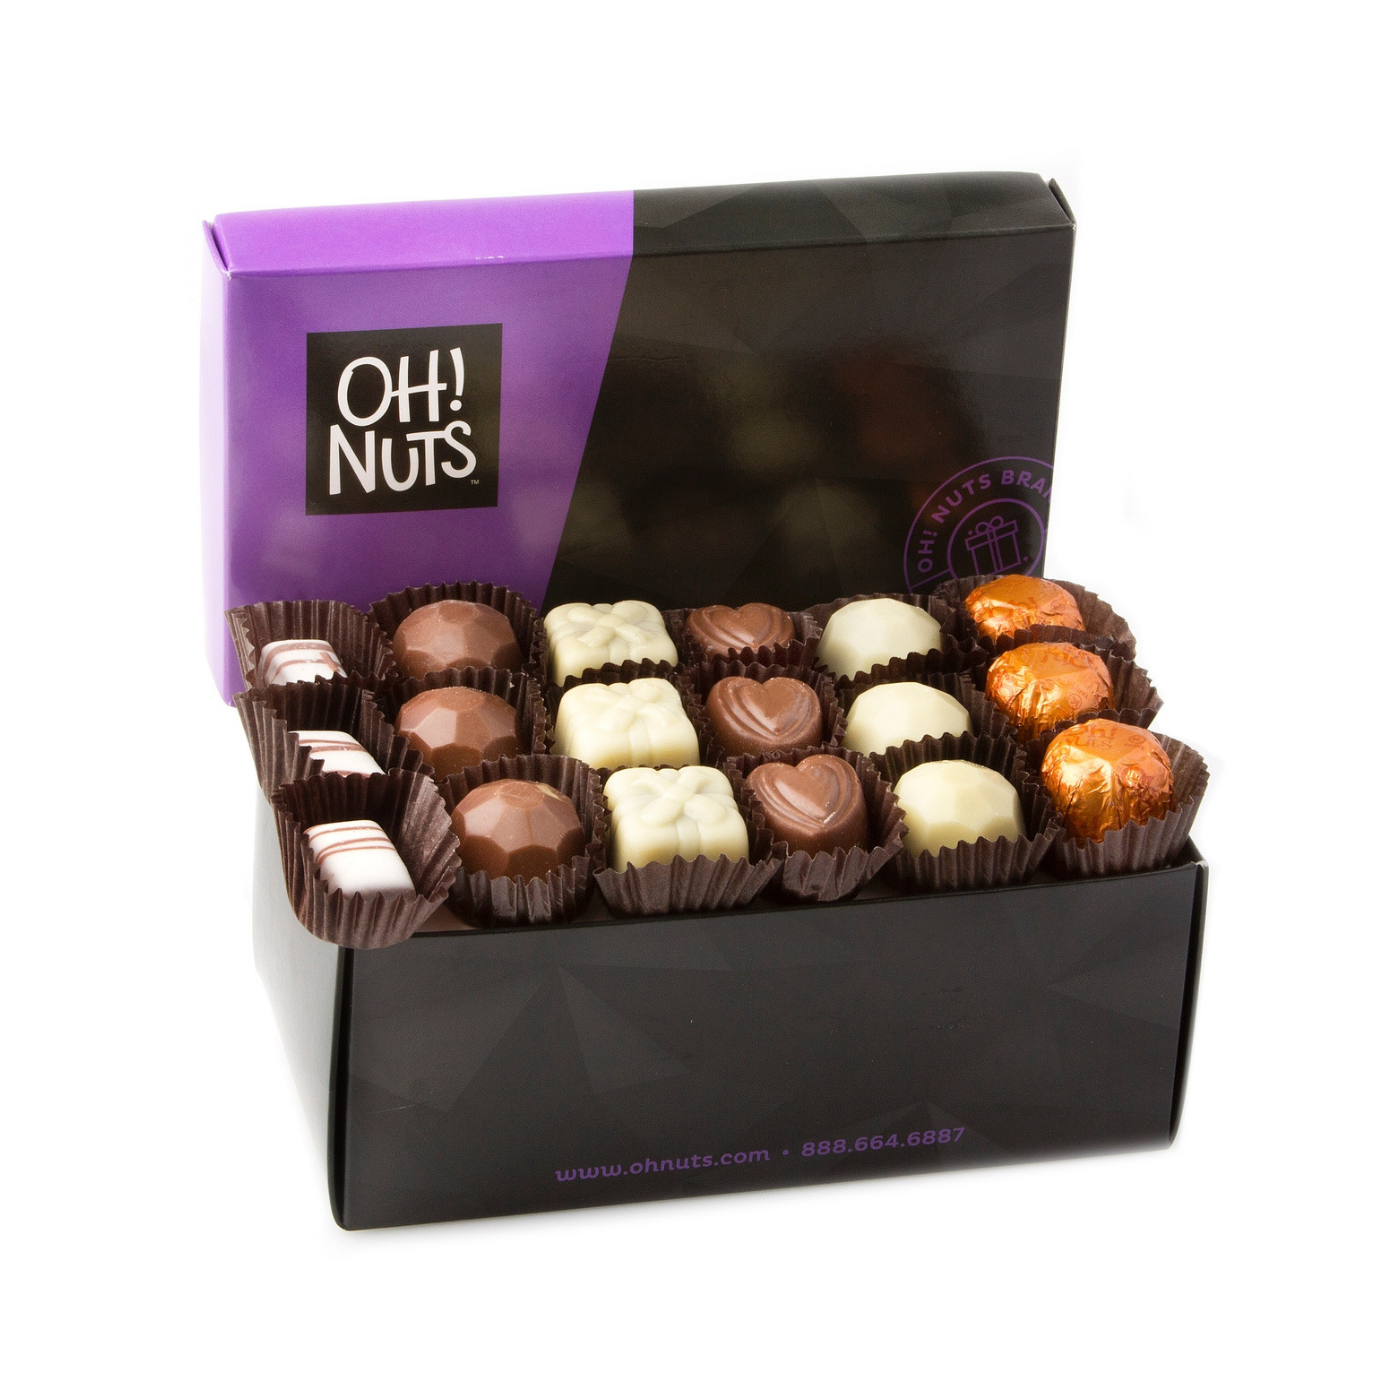 oh nuts vegan truffles winter christmas holiday shopping gift ideas | Ethical Bunny's cruelty free and vegan brand list with skincare, makeup, haircare, hygiene, bath and body guides. Featuring indie, clean, green, sustainable, non toxic, organic, botanical and natural products.